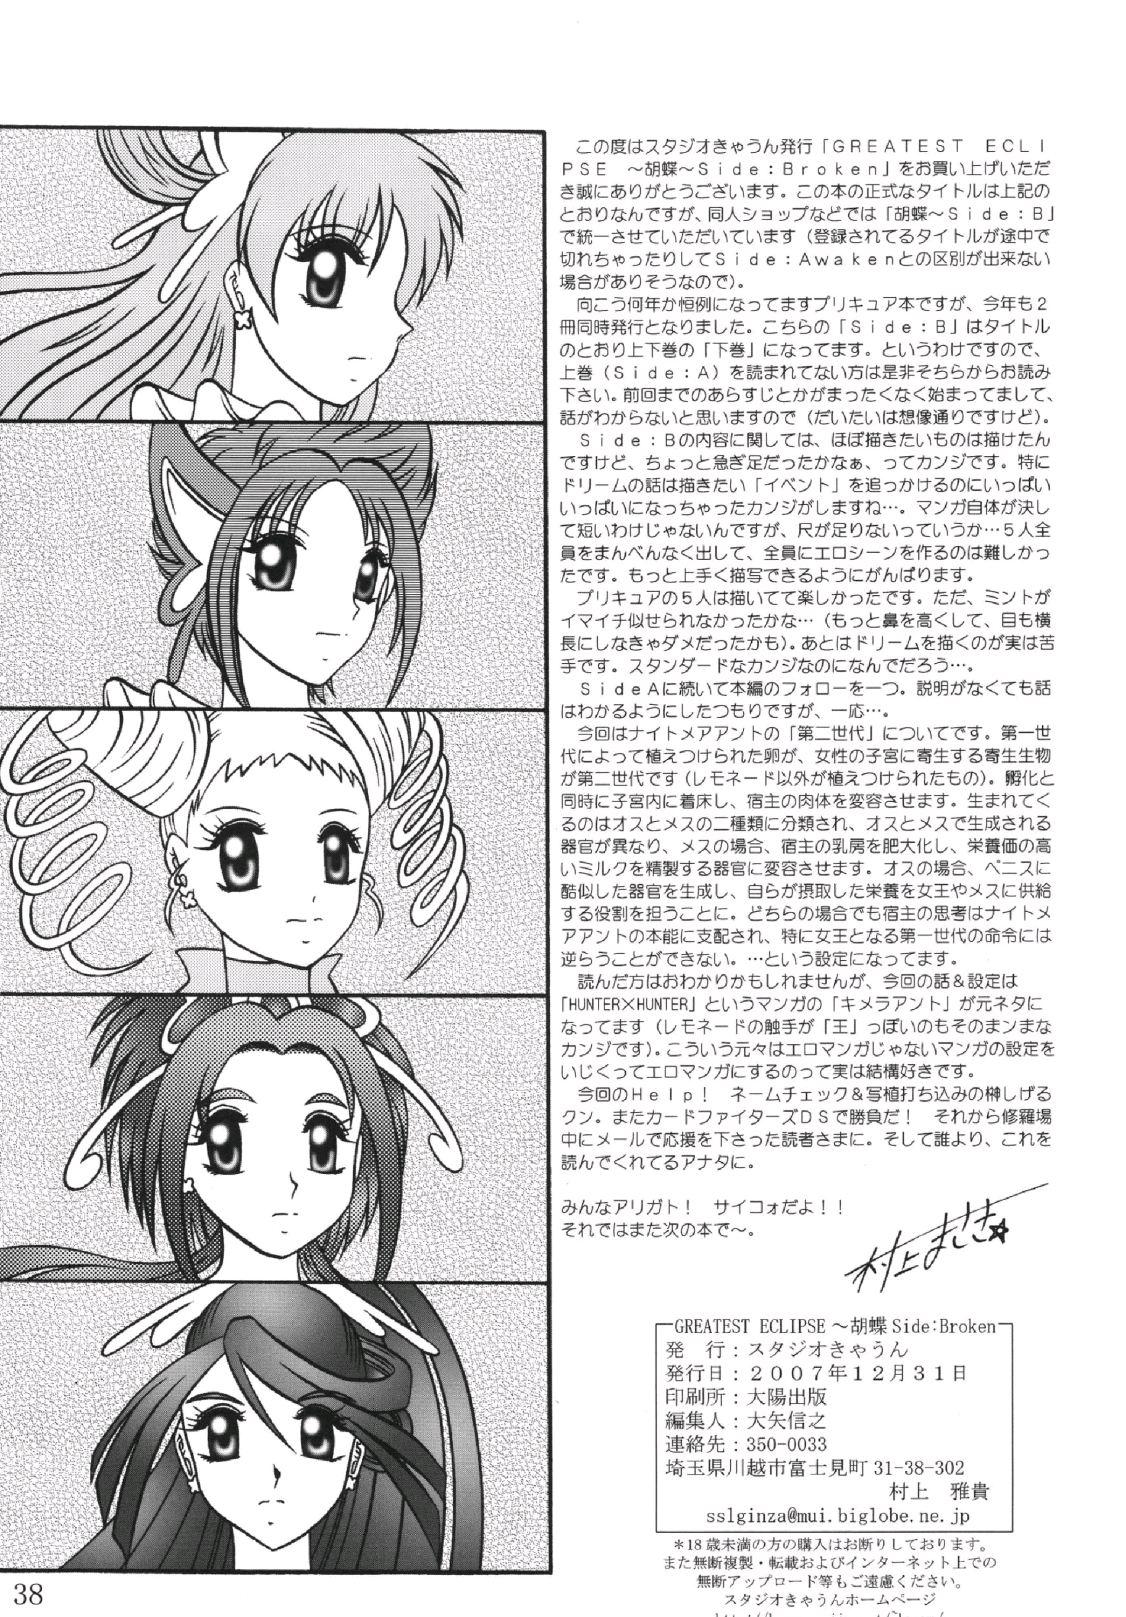 Exgf GREATEST ECLIPSE Kochou Side:B - Yes precure 5 Cock Suckers - Page 38